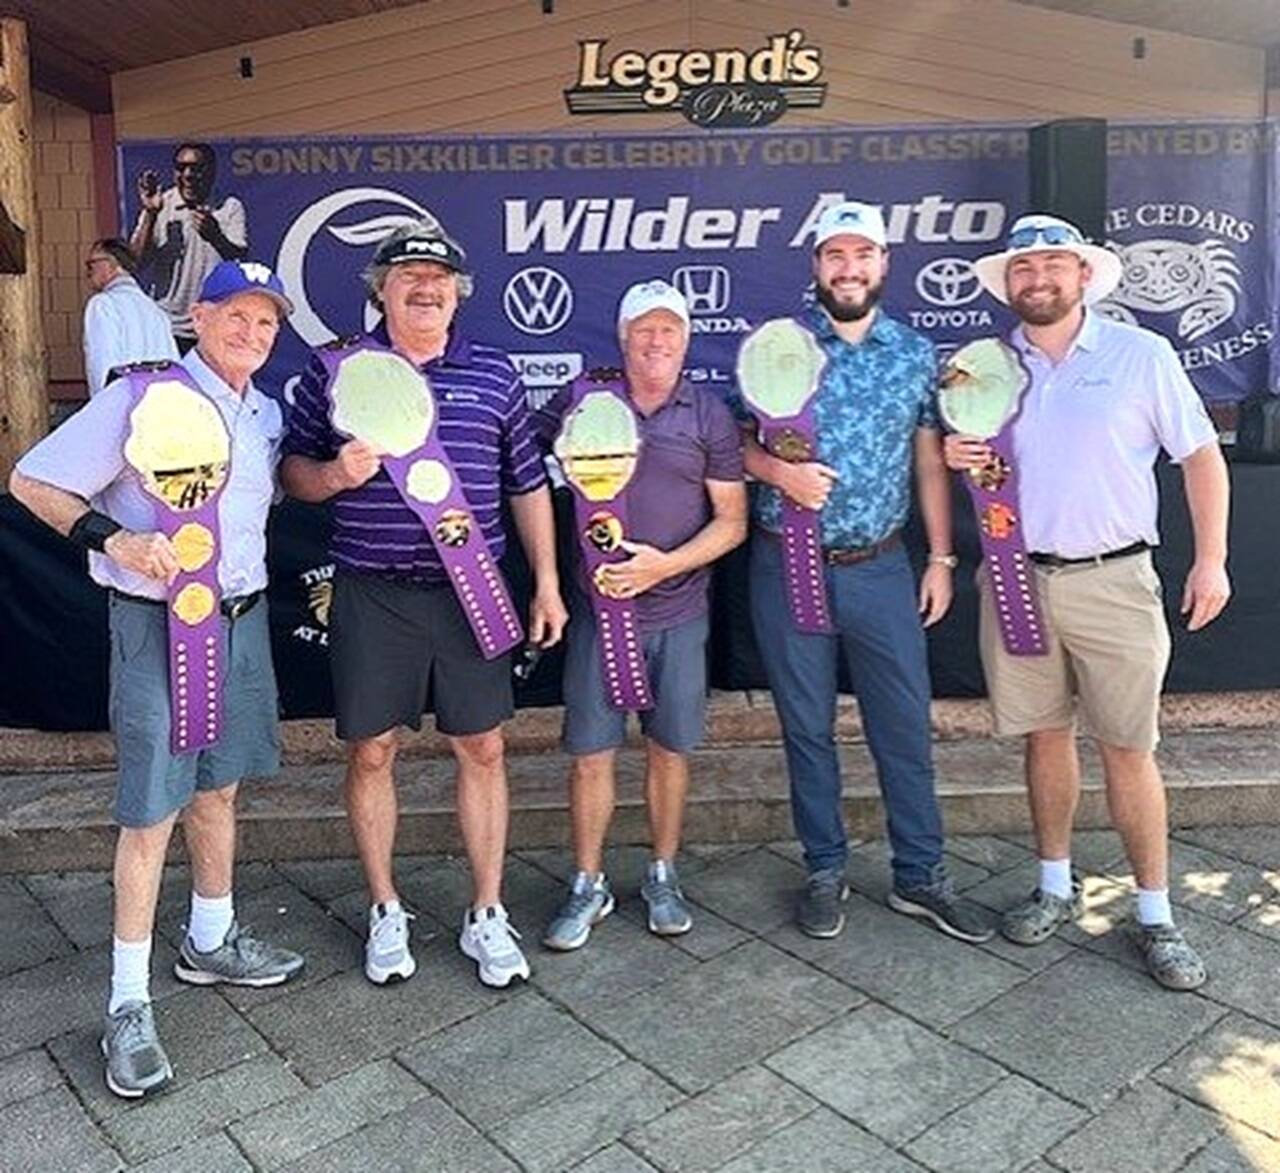 The winners of the 13th annual Sonny Sixkiller Huskies Celebrity Classic at Cedars at Dungeness. From left, Ed Cribby, Mark Mitrovich, Bob Mathews, Hunter Larson and Nick Larson played on the D.A. Davidson team. (Courtesy photo)